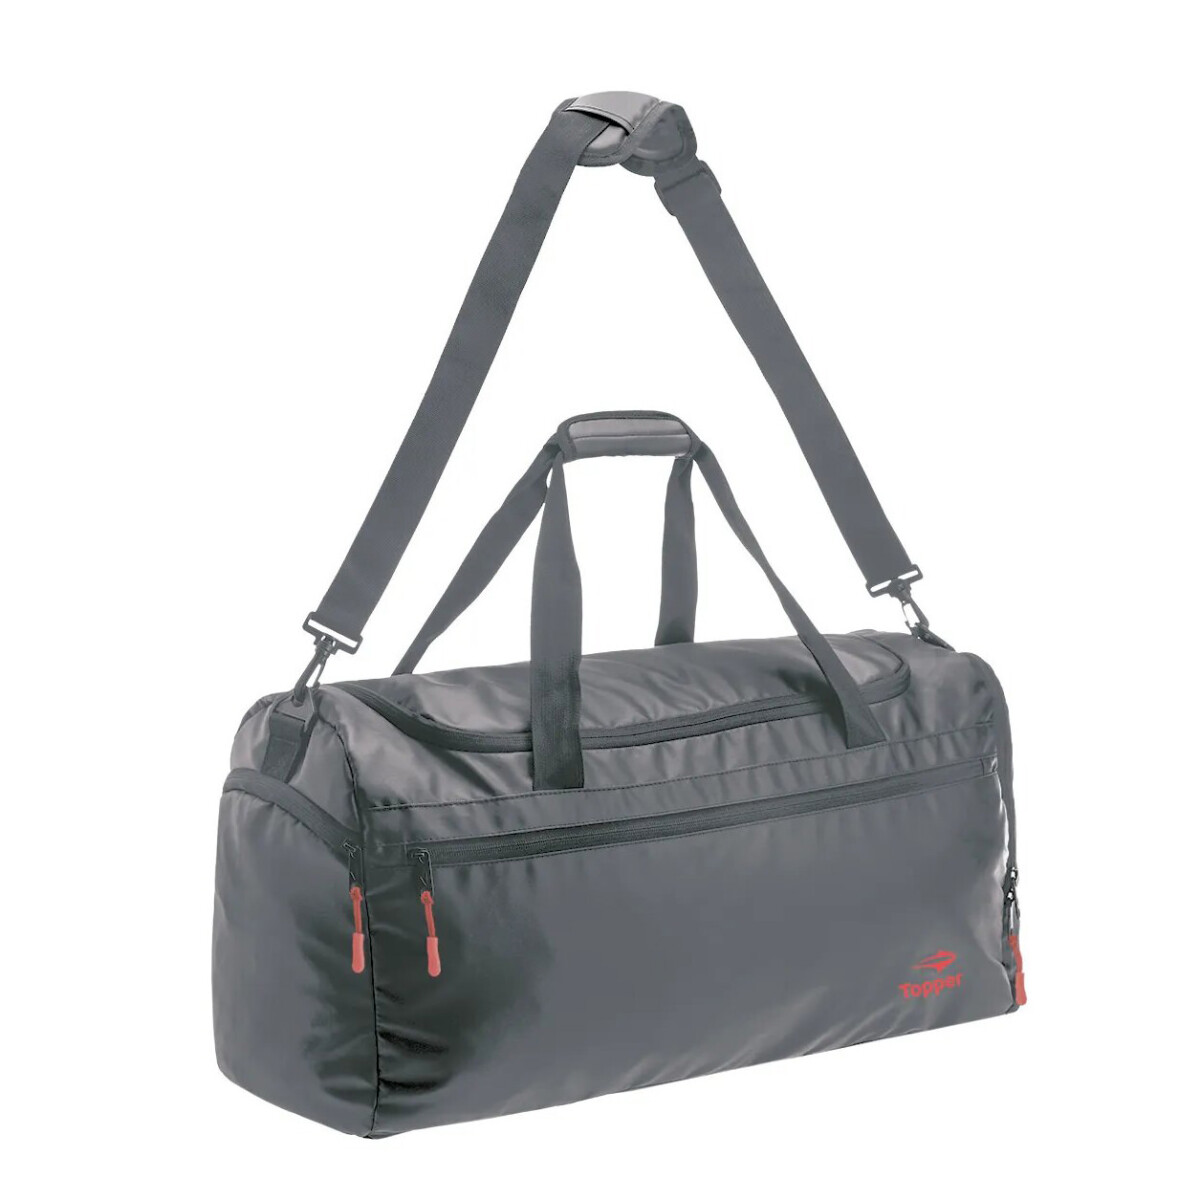 Bolso Trainning Mediano Topper - Gris 